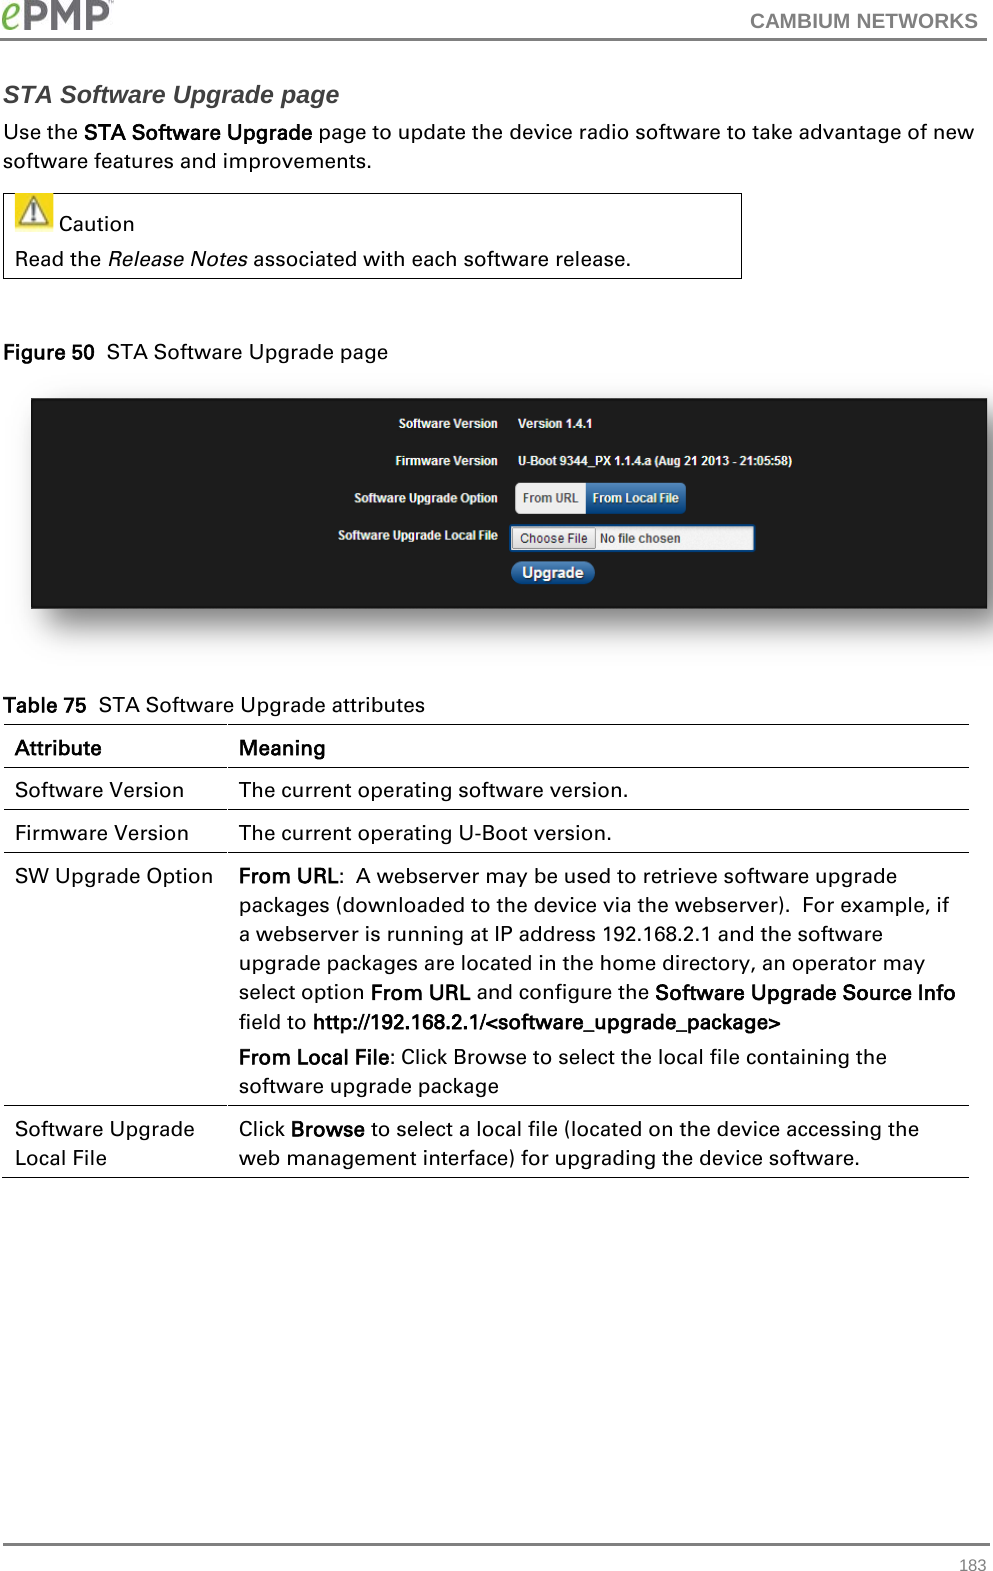 CAMBIUM NETWORKS  STA Software Upgrade page Use the STA Software Upgrade page to update the device radio software to take advantage of new software features and improvements.  Caution Read the Release Notes associated with each software release.    Figure 50  STA Software Upgrade page  Table 75  STA Software Upgrade attributes Attribute Meaning Software Version The current operating software version. Firmware Version The current operating U-Boot version. SW Upgrade Option From URL:  A webserver may be used to retrieve software upgrade packages (downloaded to the device via the webserver).  For example, if a webserver is running at IP address 192.168.2.1 and the software upgrade packages are located in the home directory, an operator may select option From URL and configure the Software Upgrade Source Info field to http://192.168.2.1/&lt;software_upgrade_package&gt; From Local File: Click Browse to select the local file containing the software upgrade package Software Upgrade Local File Click Browse to select a local file (located on the device accessing the web management interface) for upgrading the device software.    183 